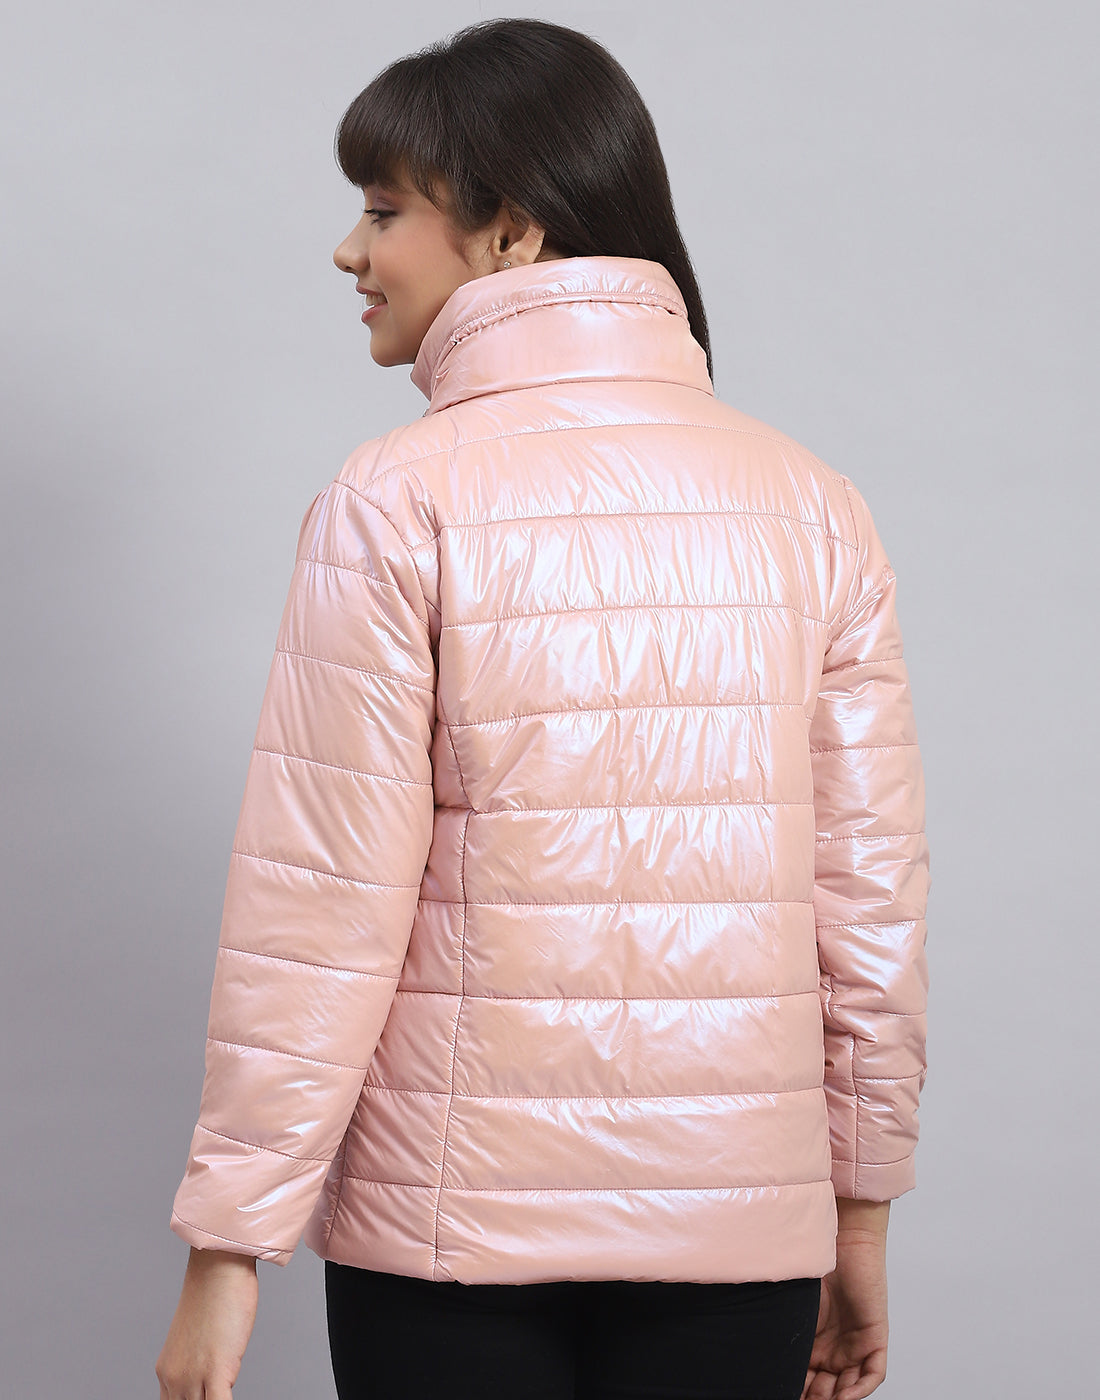 Girls Pink Solid Stand Collar Full Sleeve Girls Jacket